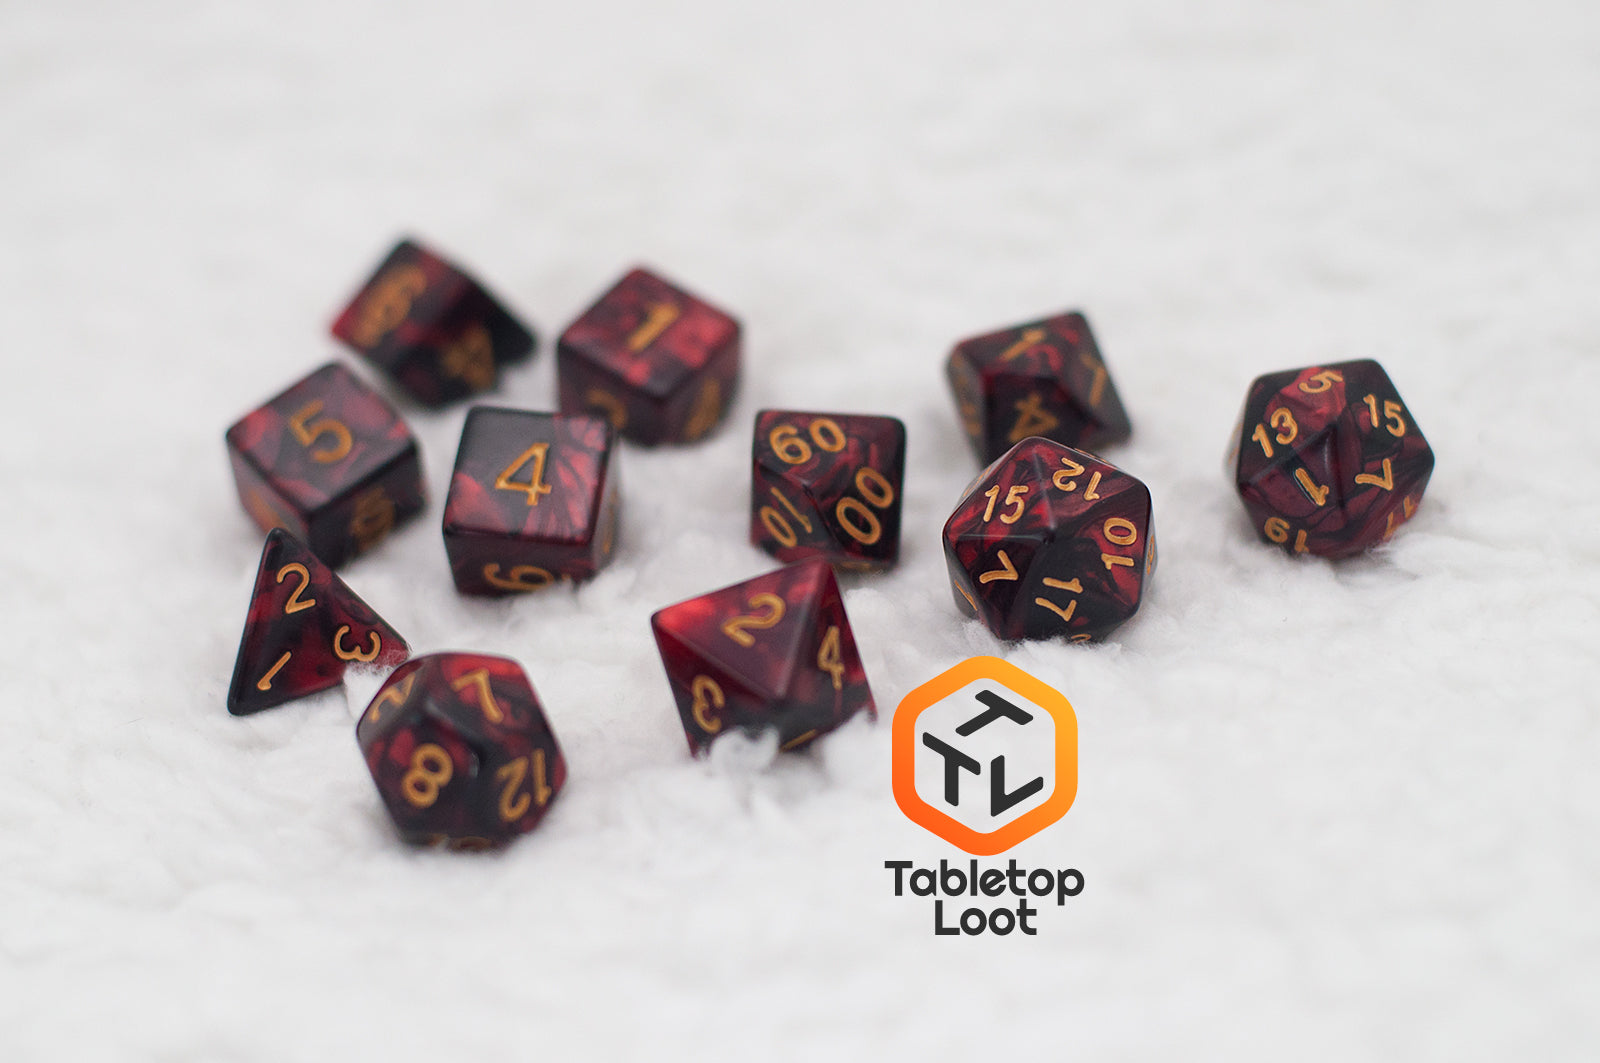 The Demon Stones 11 piece dice set from Tabletop Loot with deep red swirled with black resin and gold numbering.